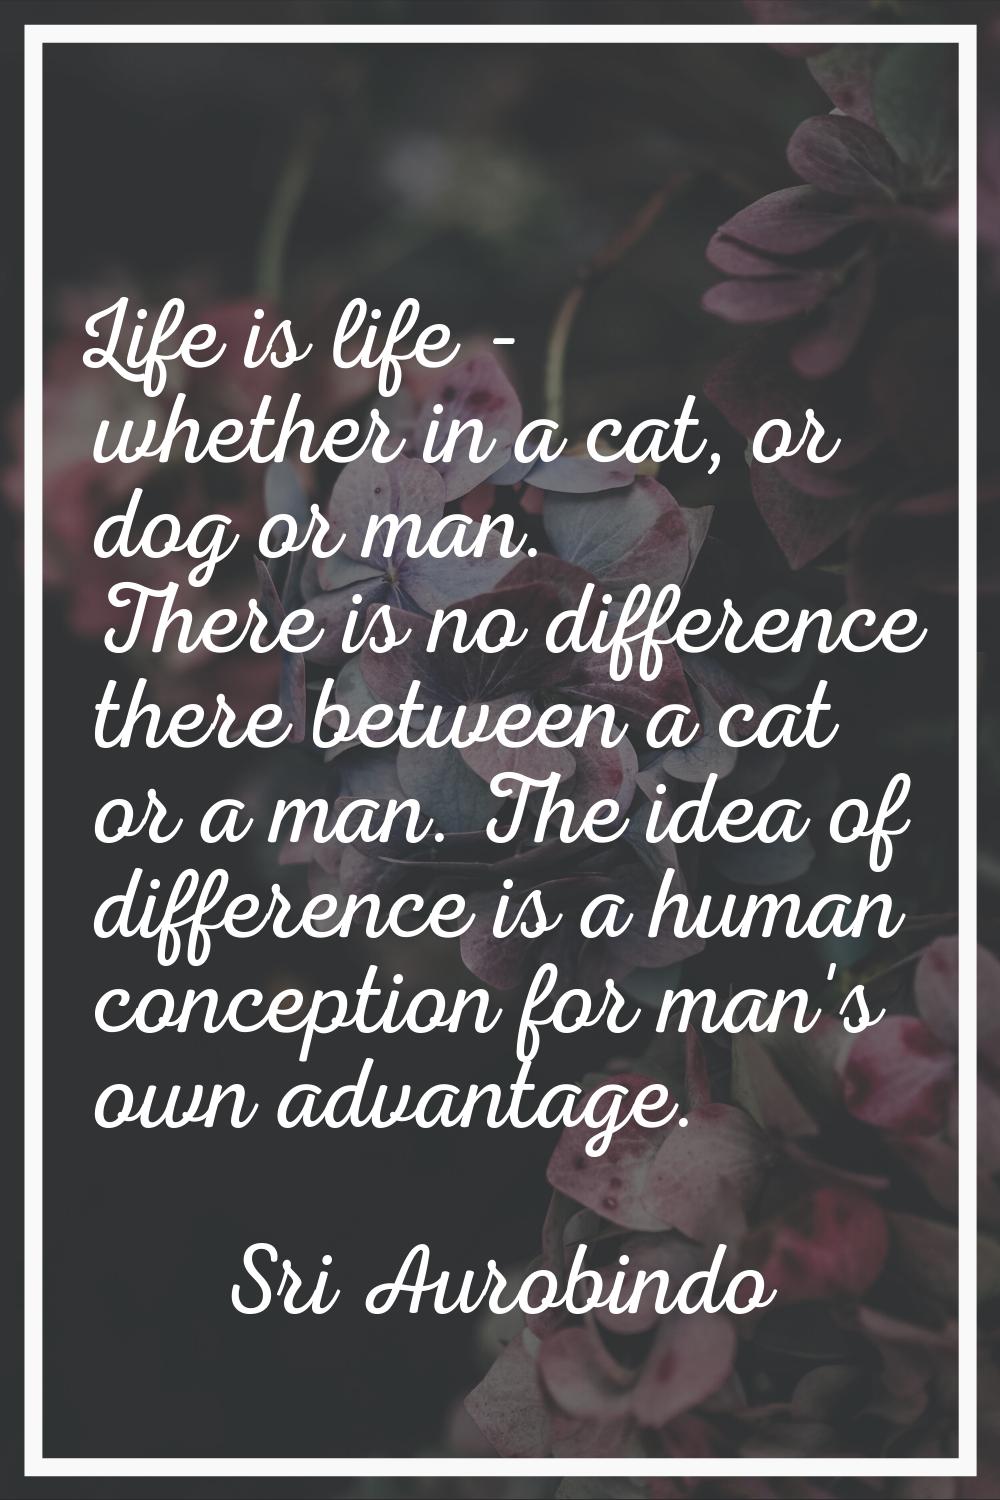 Life is life - whether in a cat, or dog or man. There is no difference there between a cat or a man